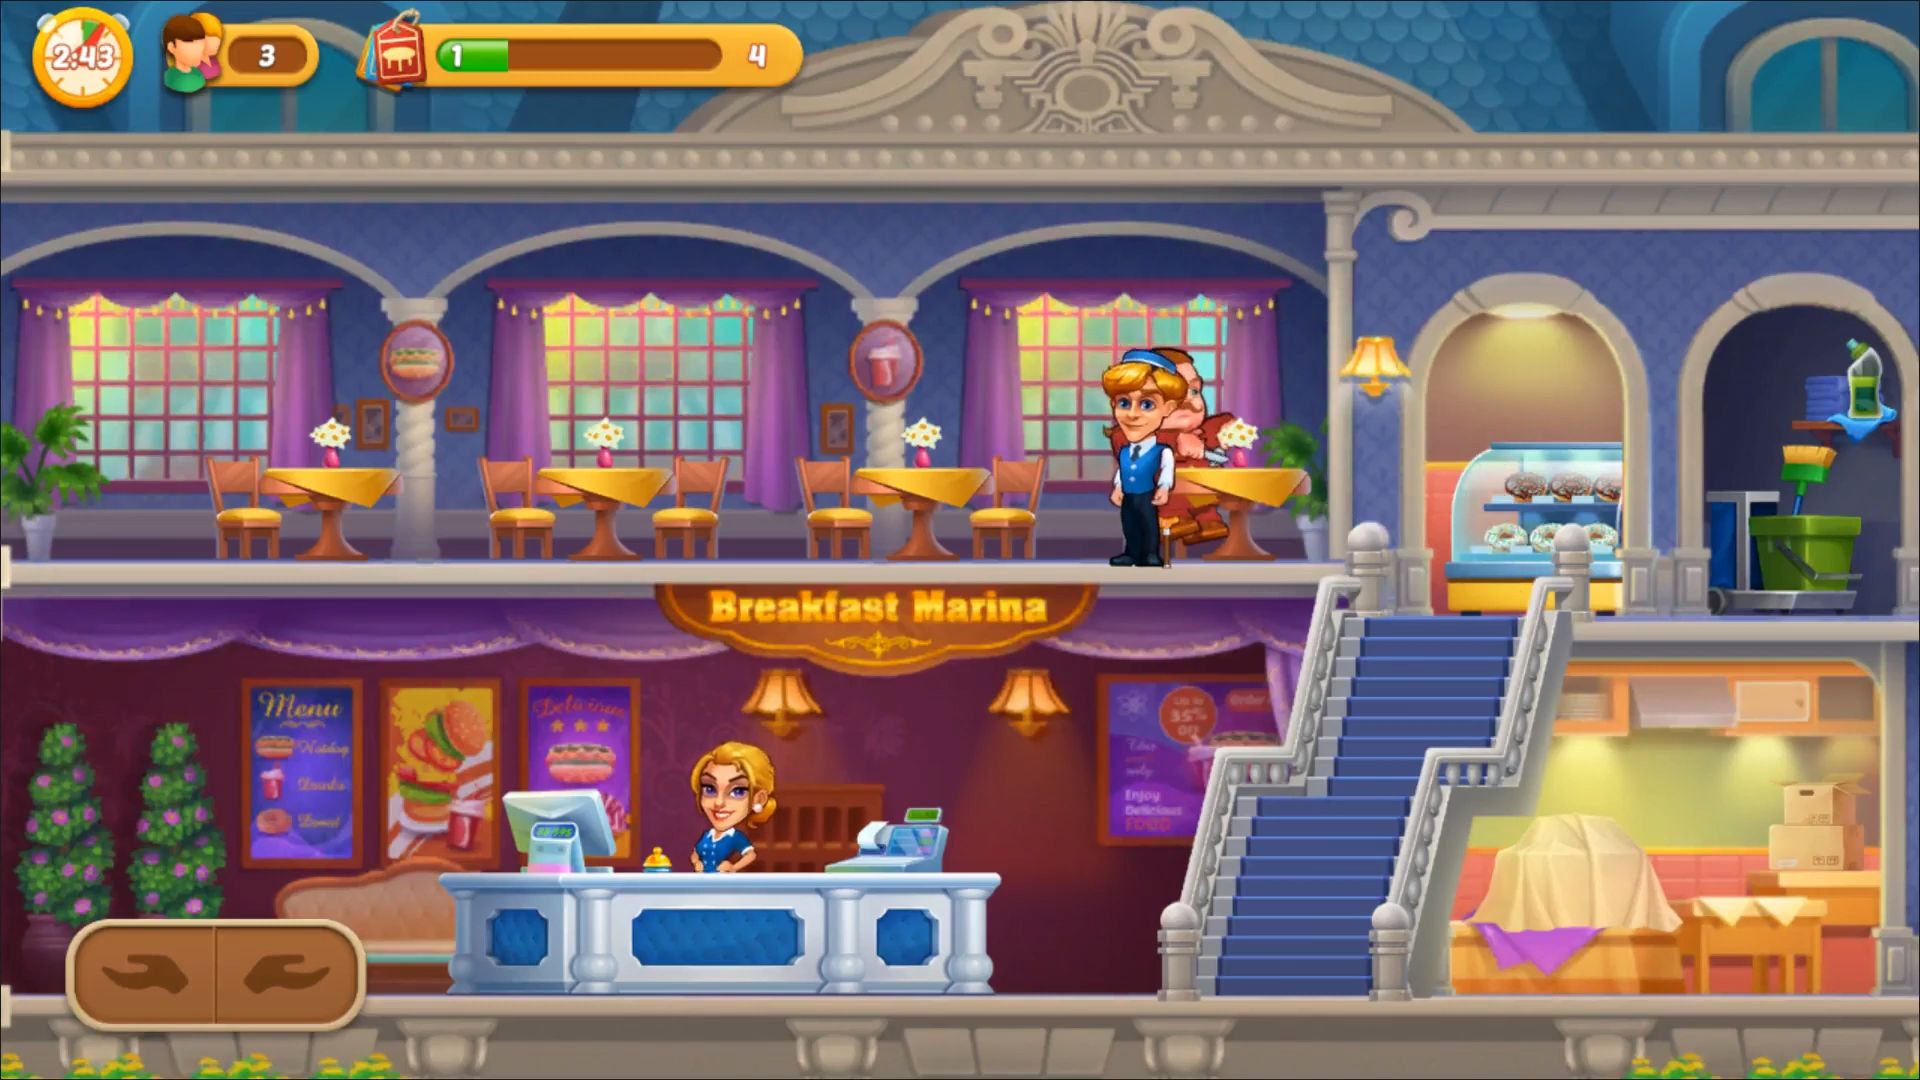 Full version of Android apk Dream Restaurant - Hotel games for tablet and phone.